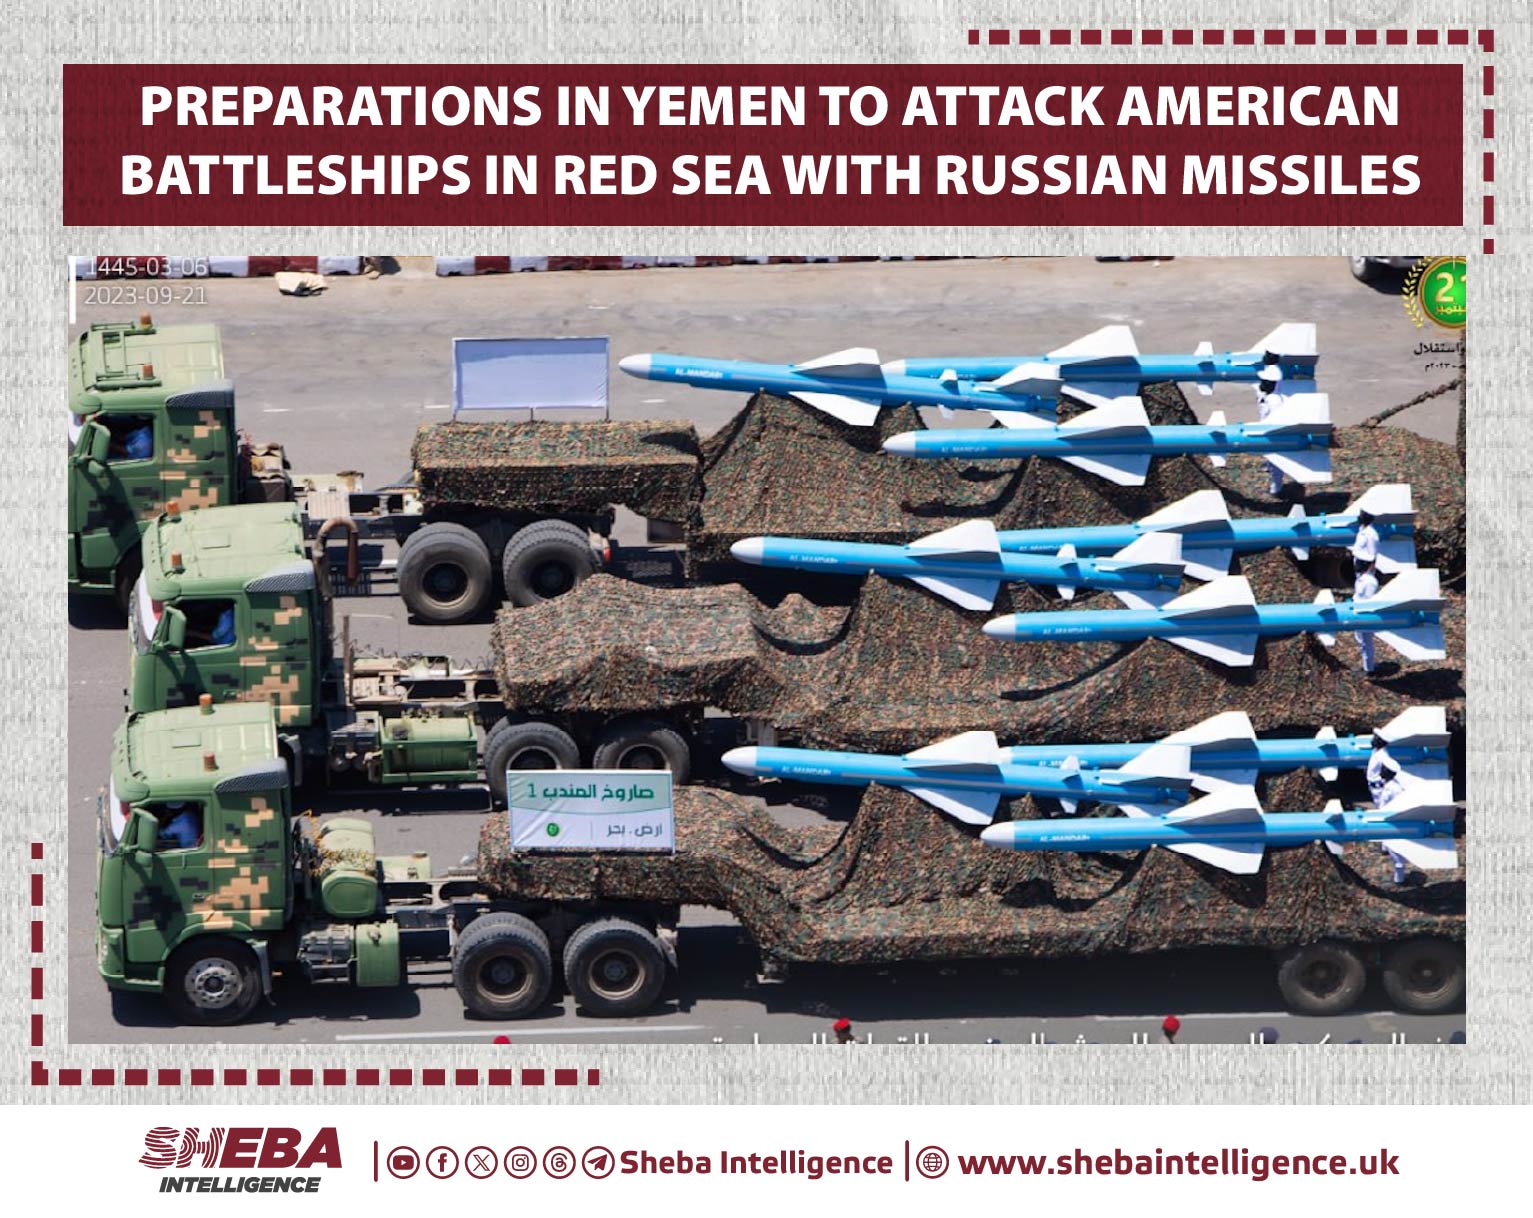 Preparations in Yemen to Attack American Battleships in Red Sea with Russian Missiles